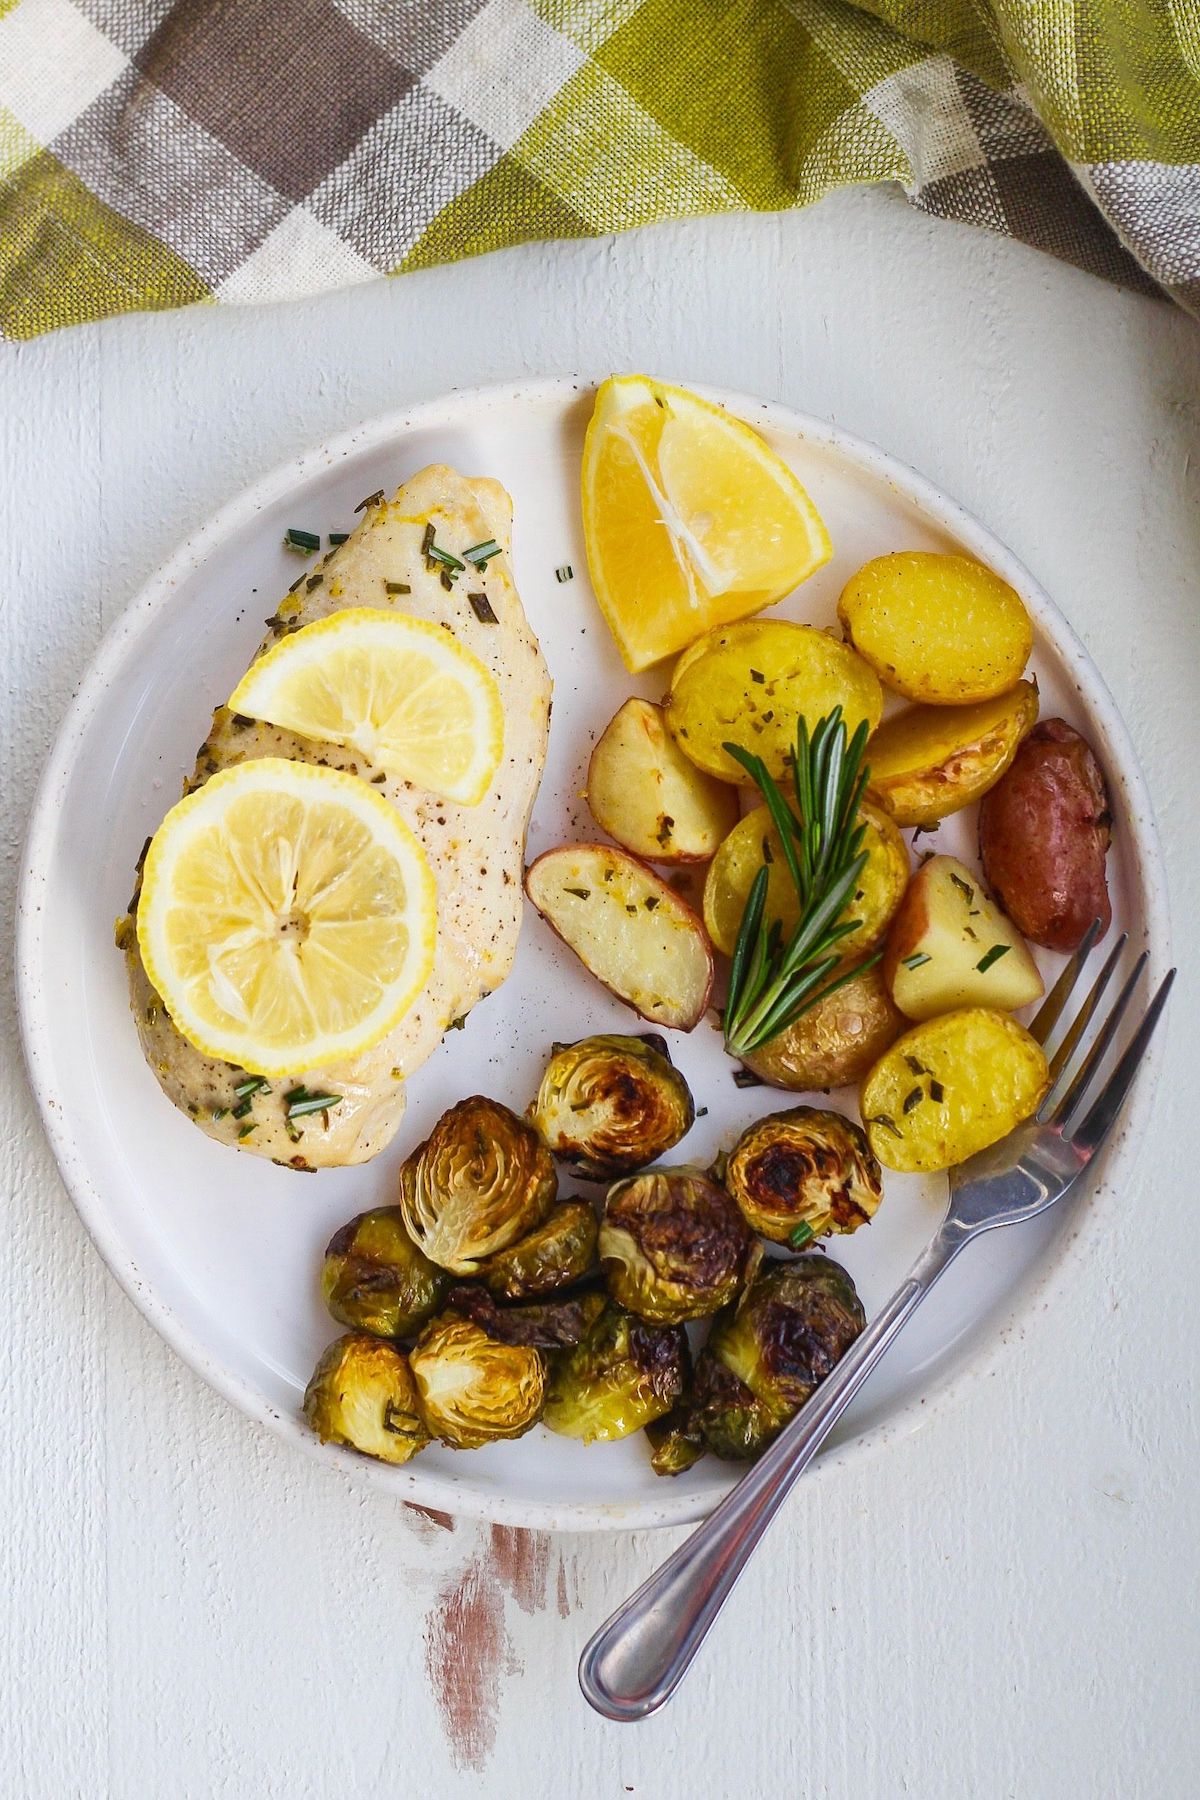 10 Mediterranean Diet Approved Recipes to Add to Your Meal Plan - One Pan Lemon Chicken